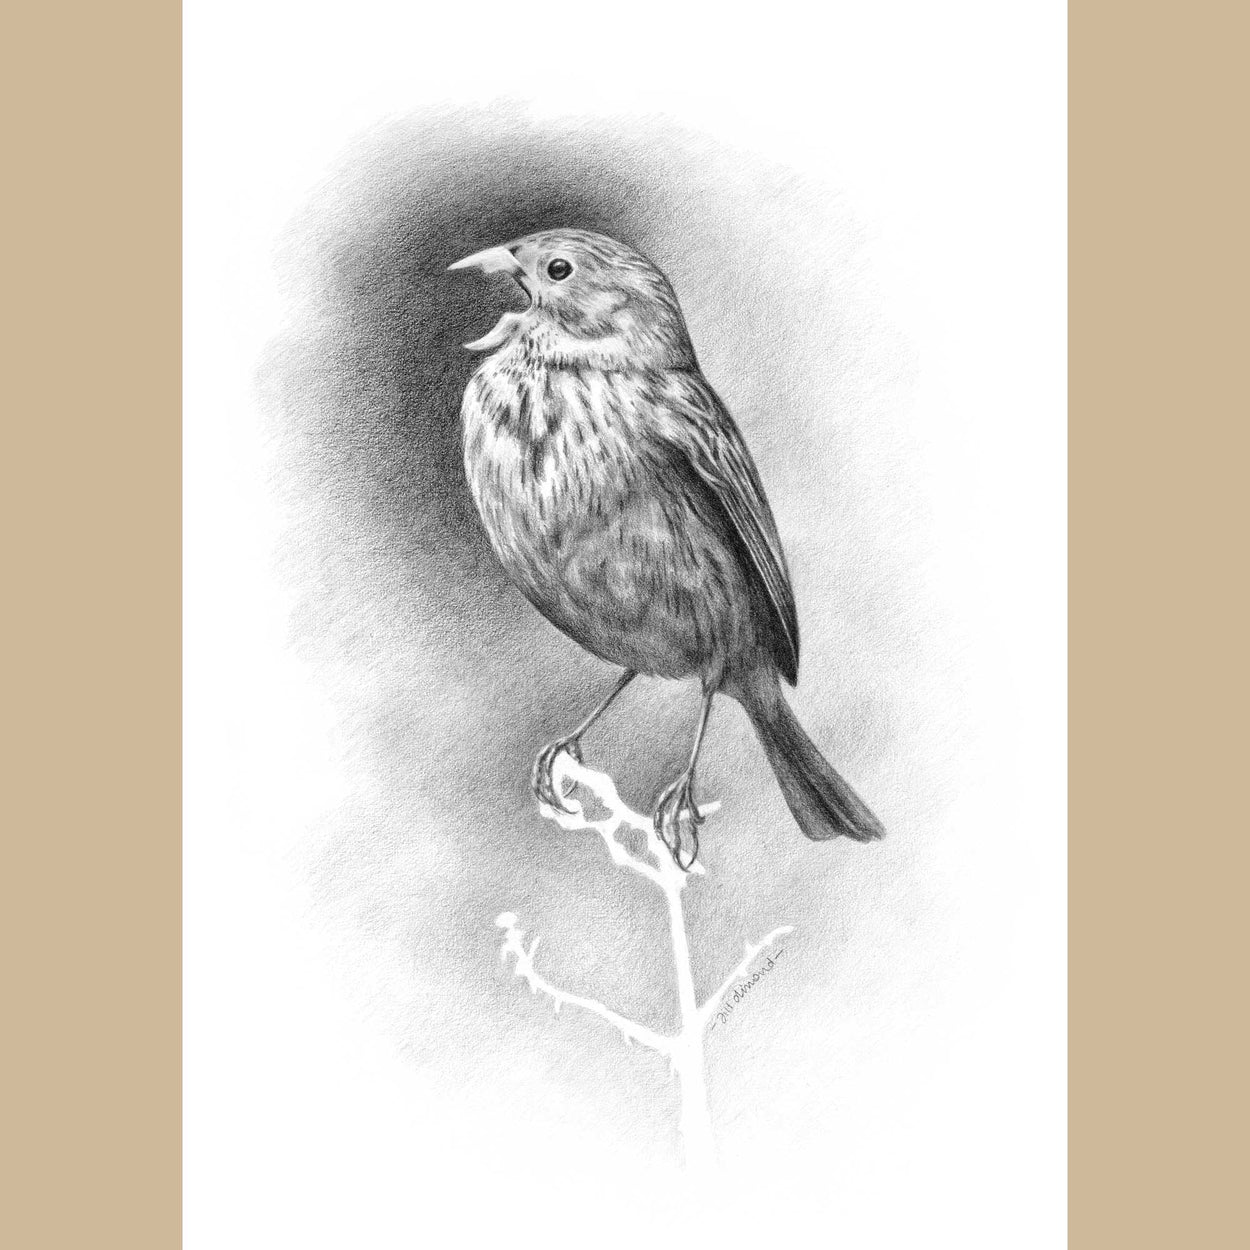 Black and white pencil drawing on white paper of a small bird singing